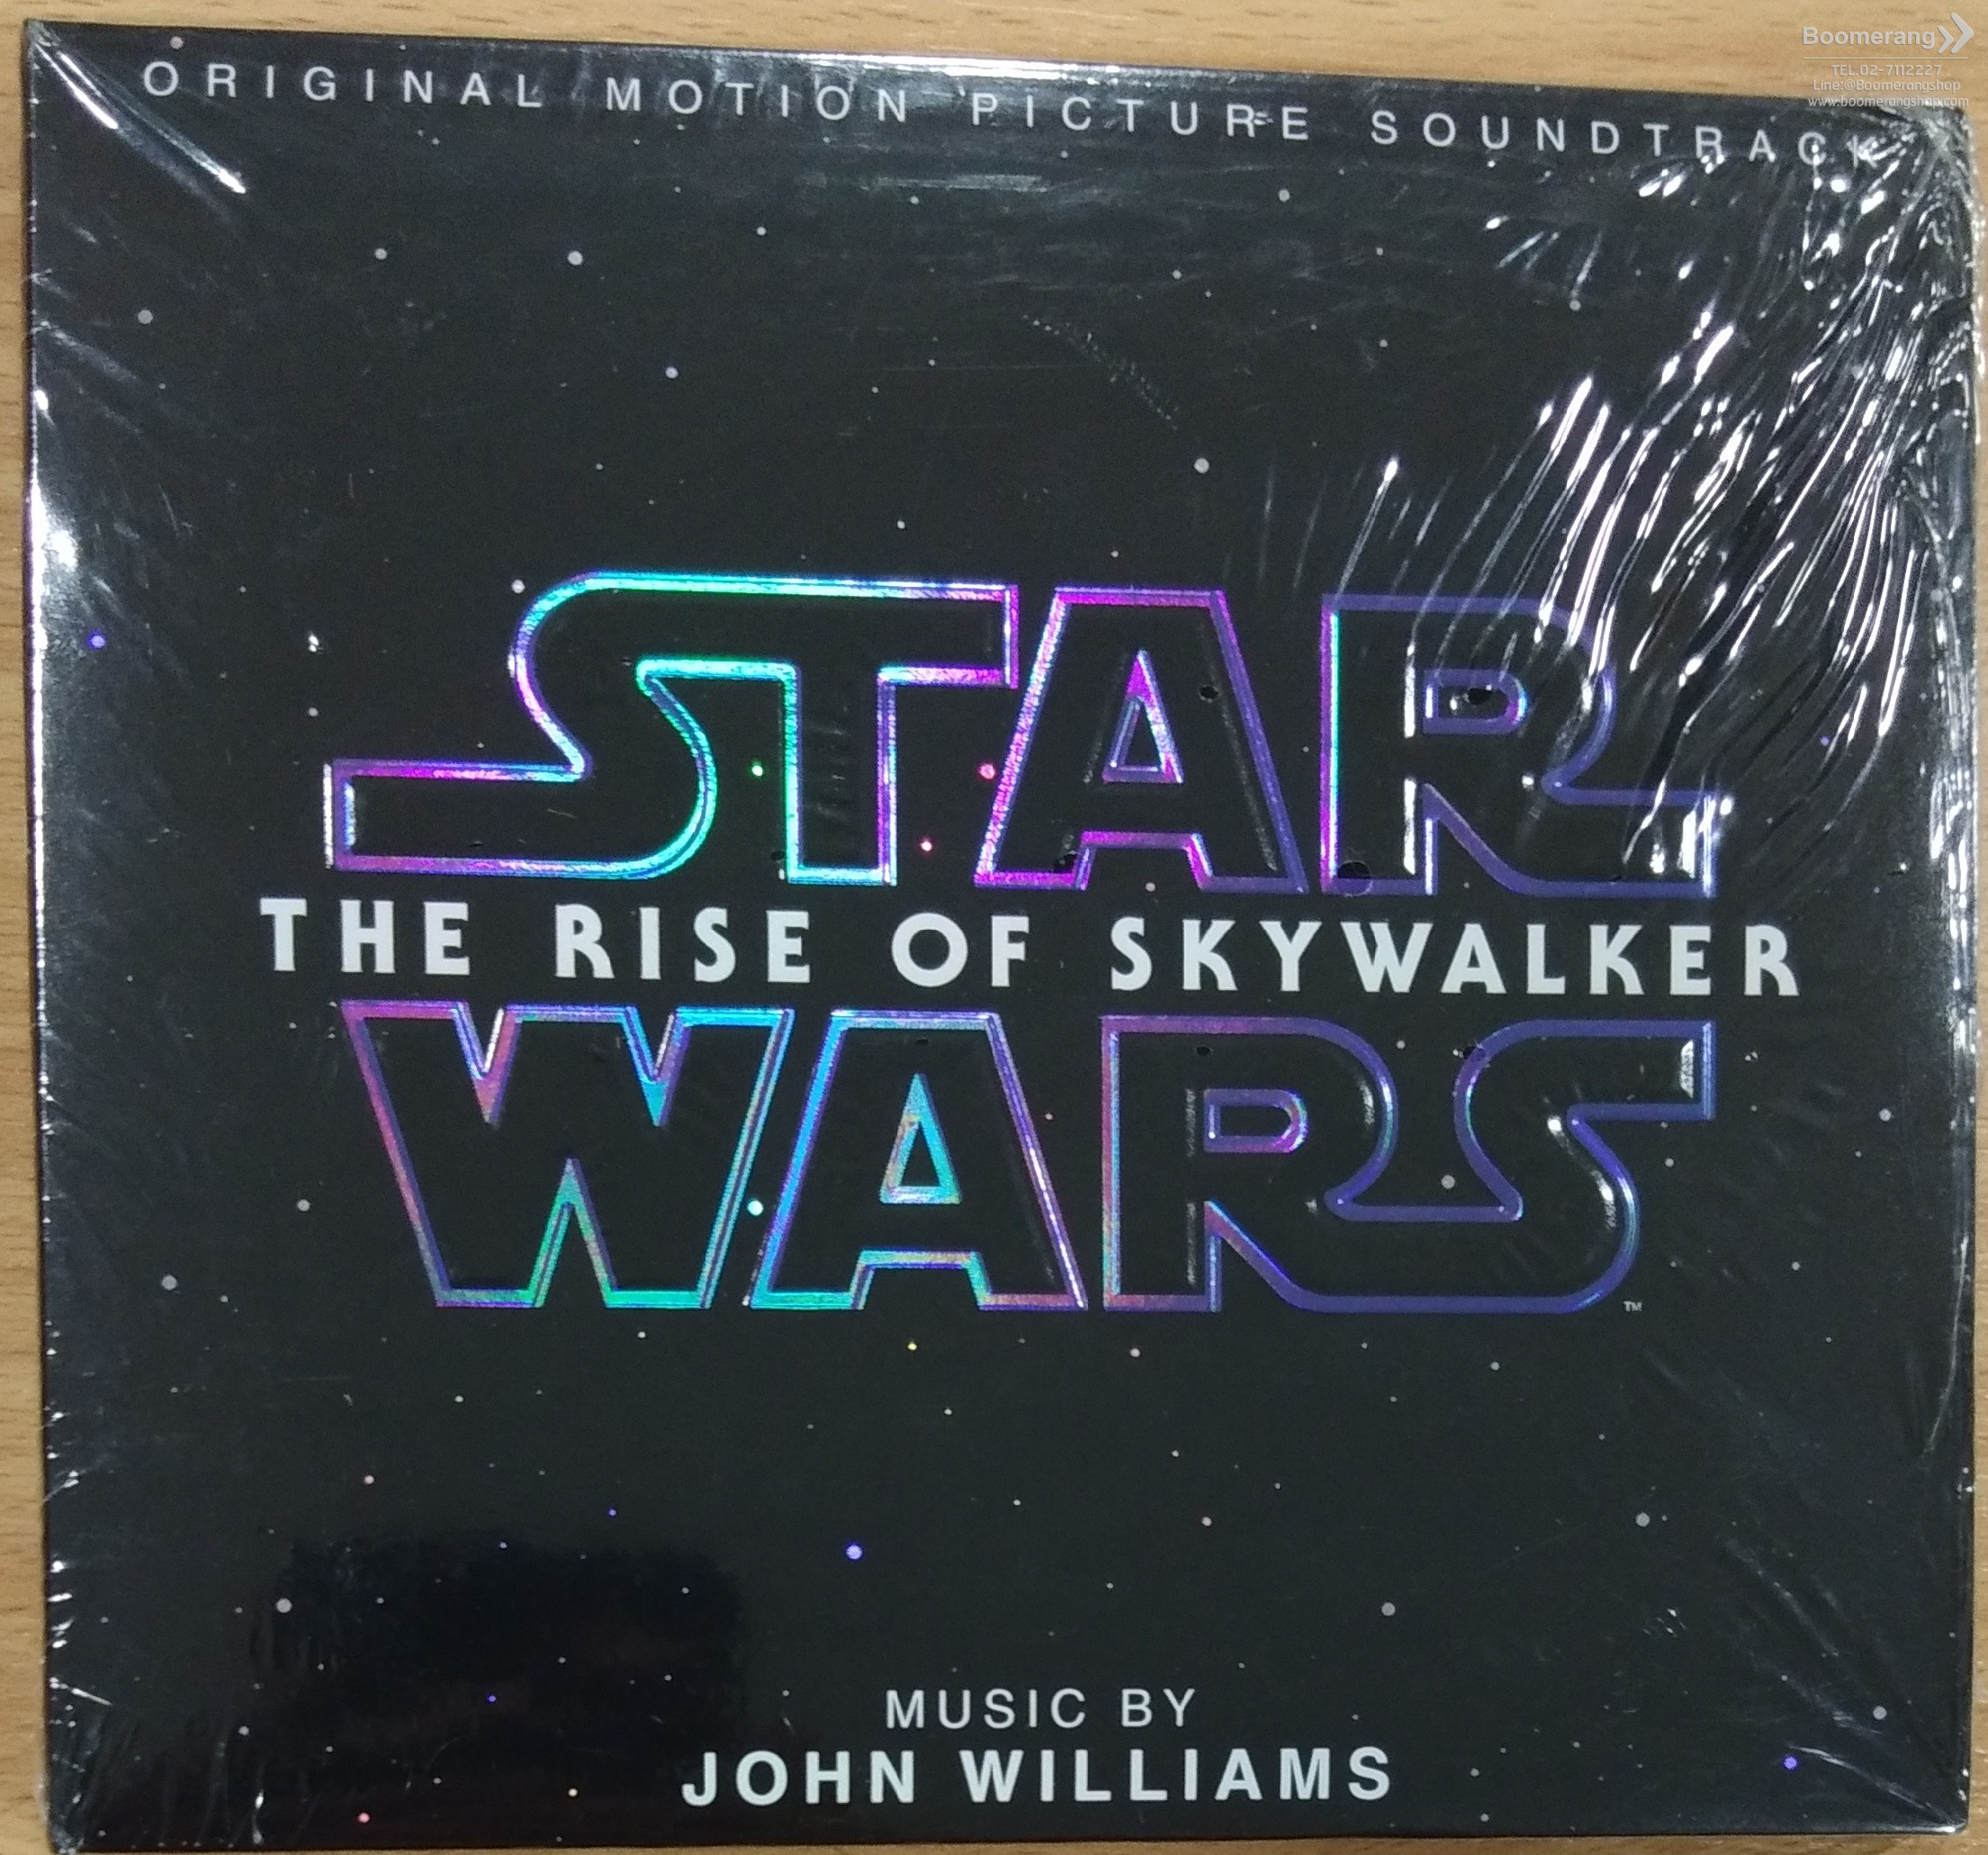 Star Wars: The Rise of Skywalker (Original Motion Picture